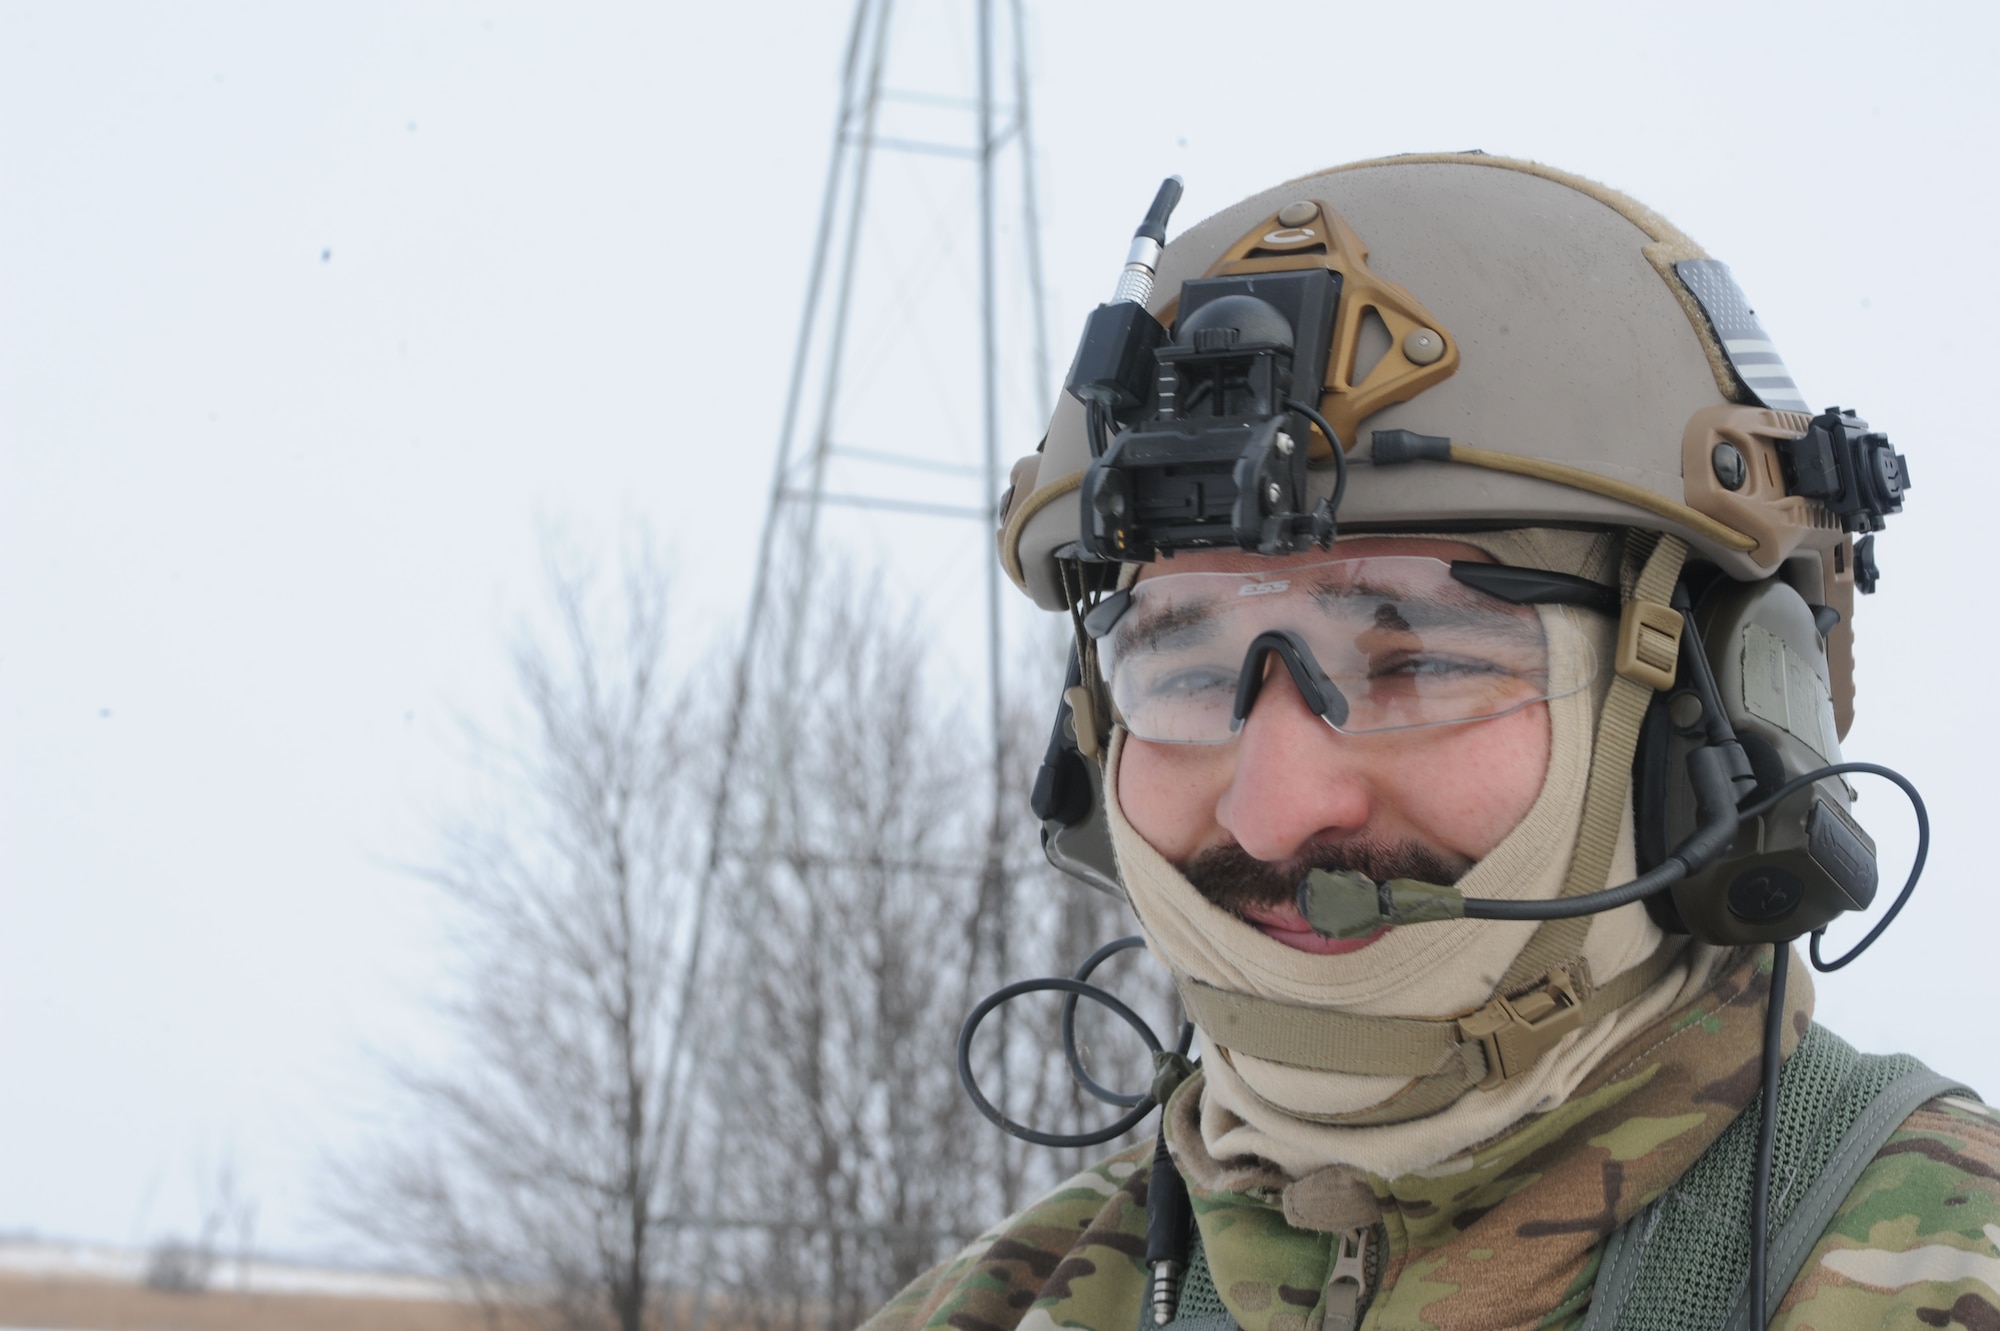 Tech. Sgt. Thomas Liscomb, 54th Helicopter Squadron flight engineer, smiles during a search and rescue training mission near Minot Air Force Base, N.D., Feb. 11, 2015. During the training, Liscomb and the rest of a UH1-N helicopter crew practiced extracting individuals using a force penetrator. (U.S. Air Force photos/Senior Airman Stephanie Morris)